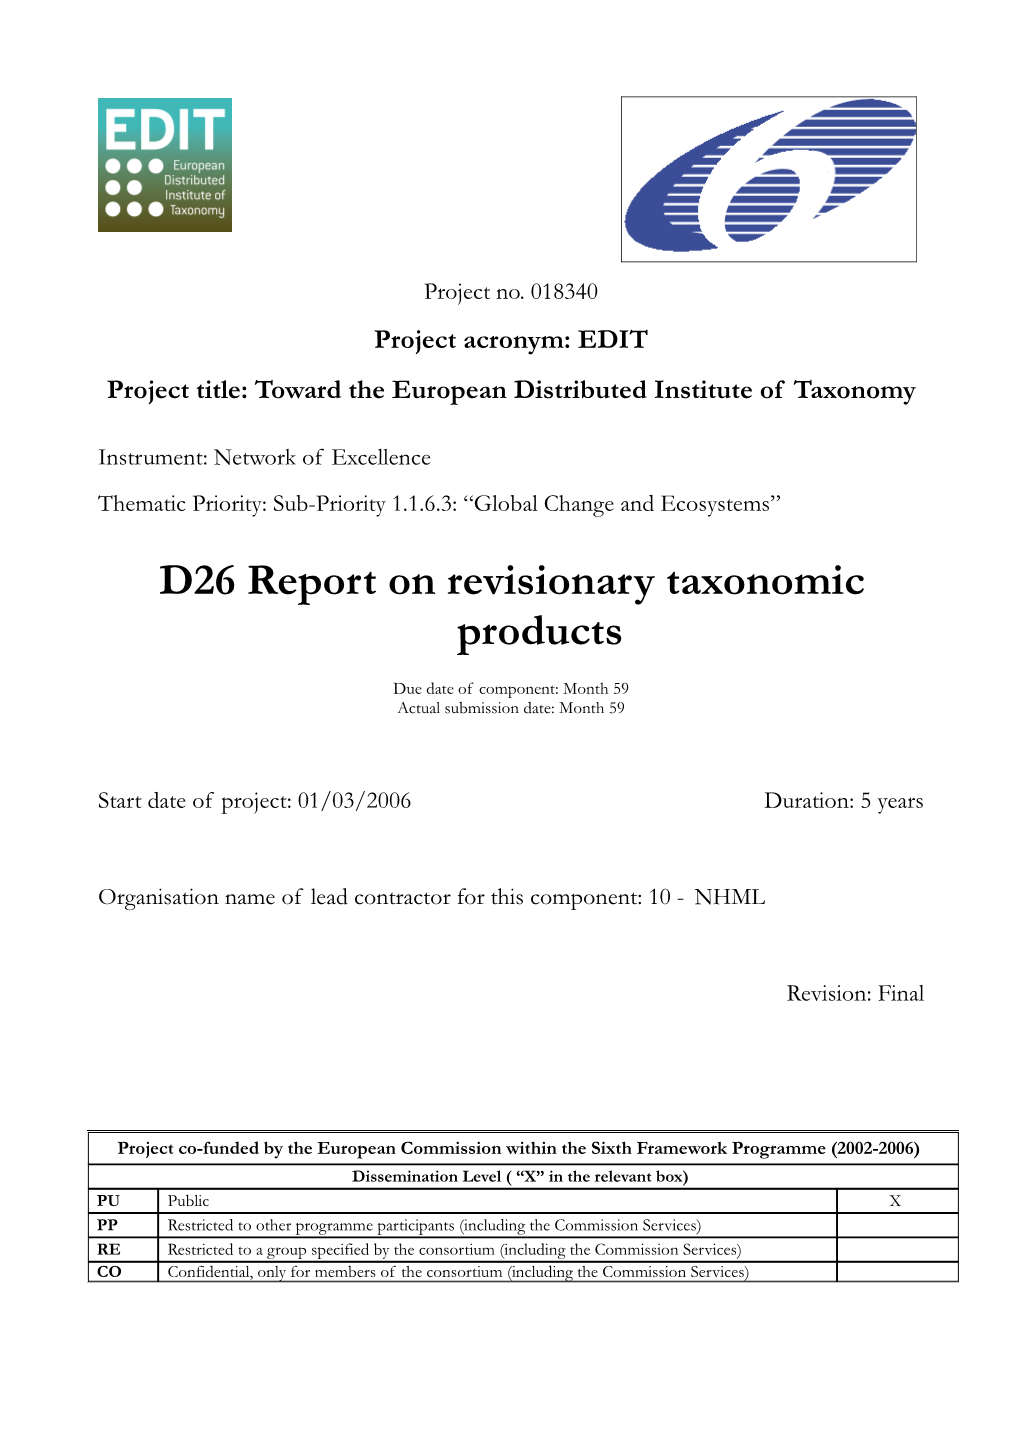 D26 Report on Revisionary Taxonomic Products